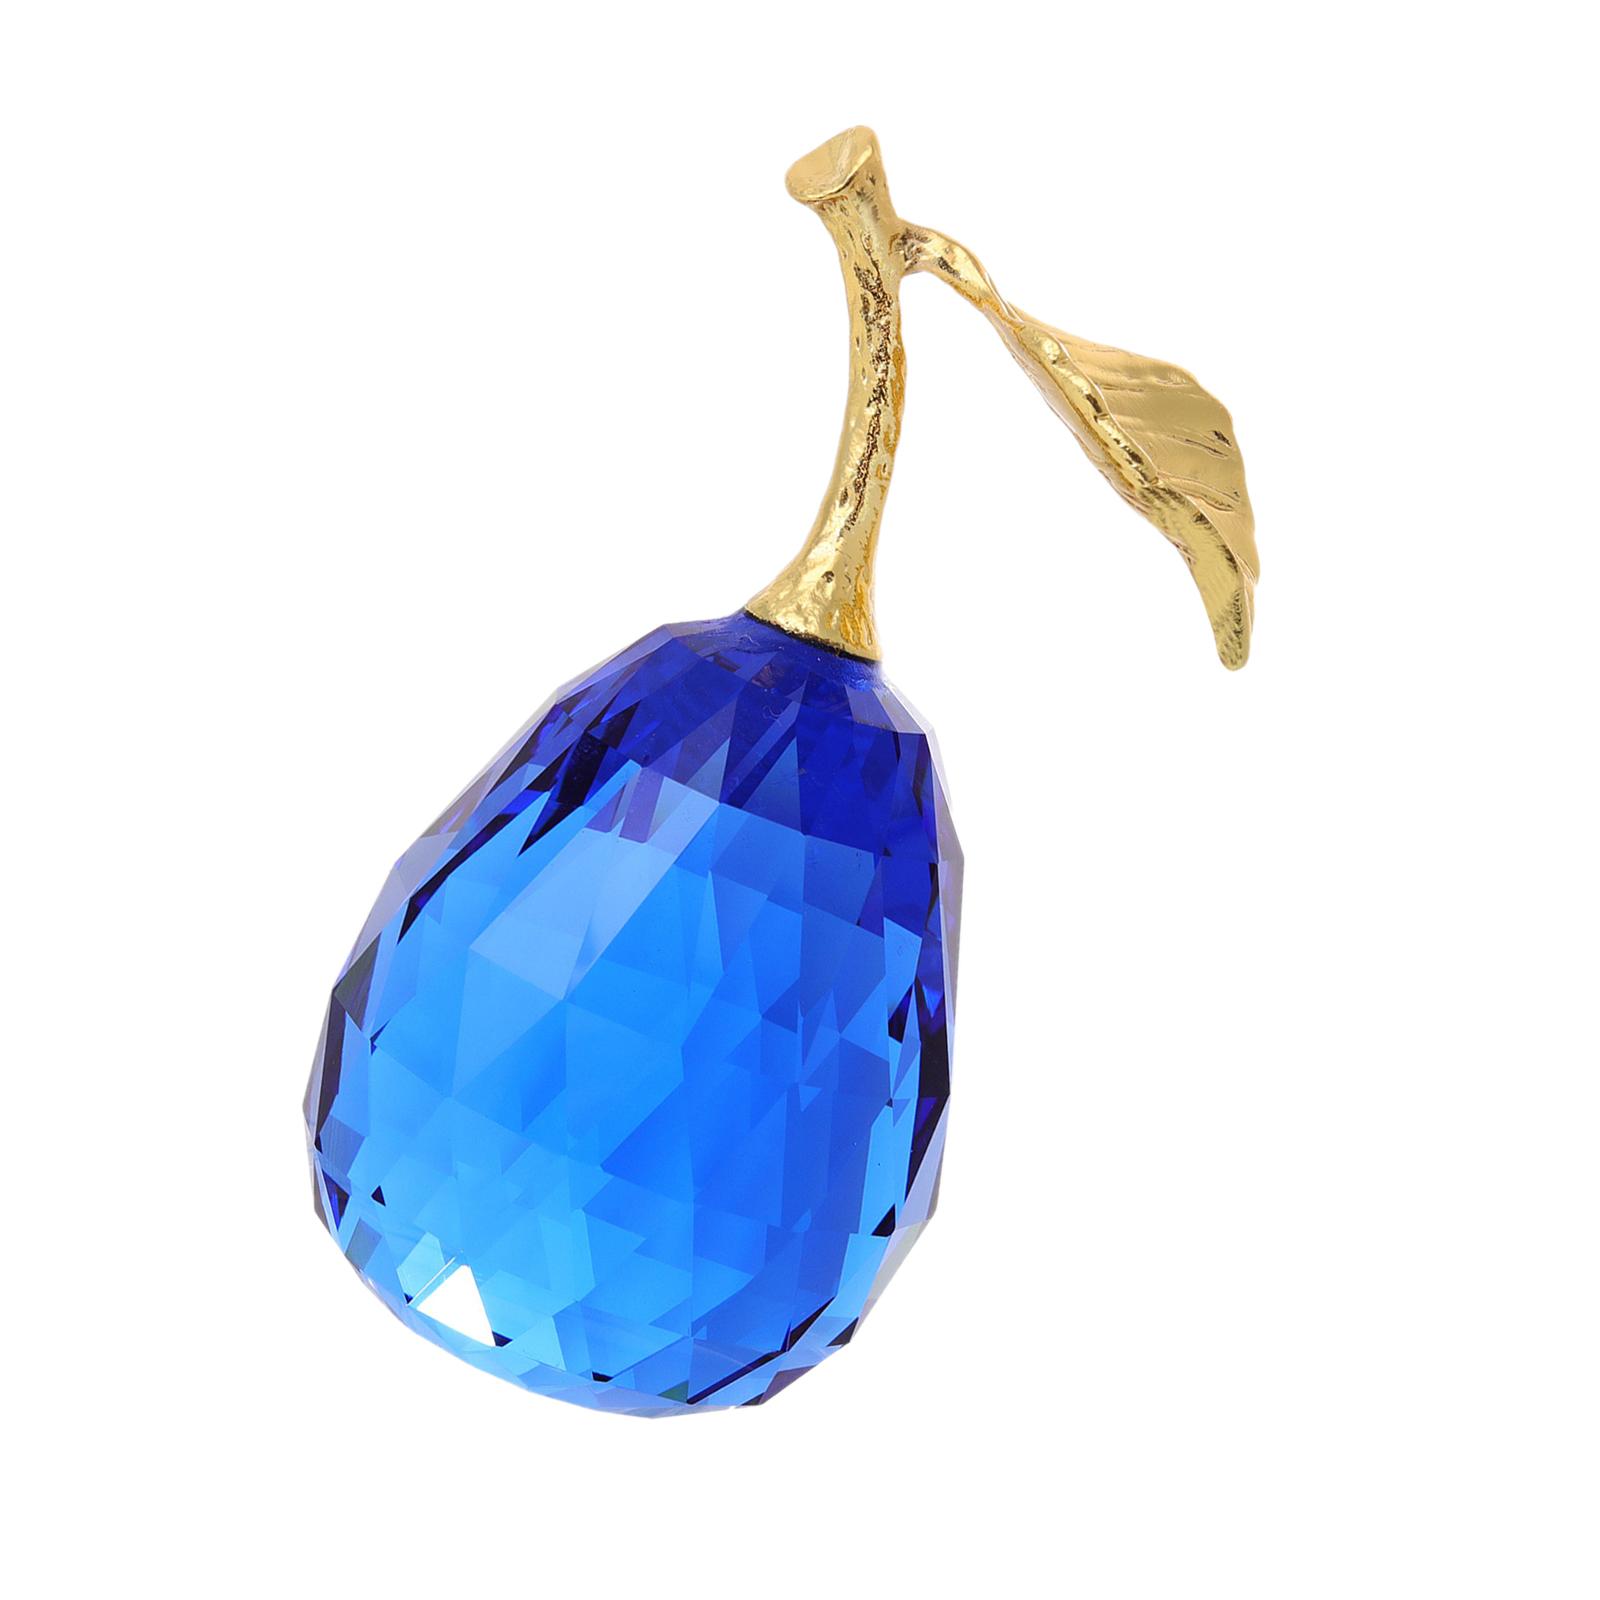 Pear Fruits Ornament Collectibles Table Home Decor Office Party Blue